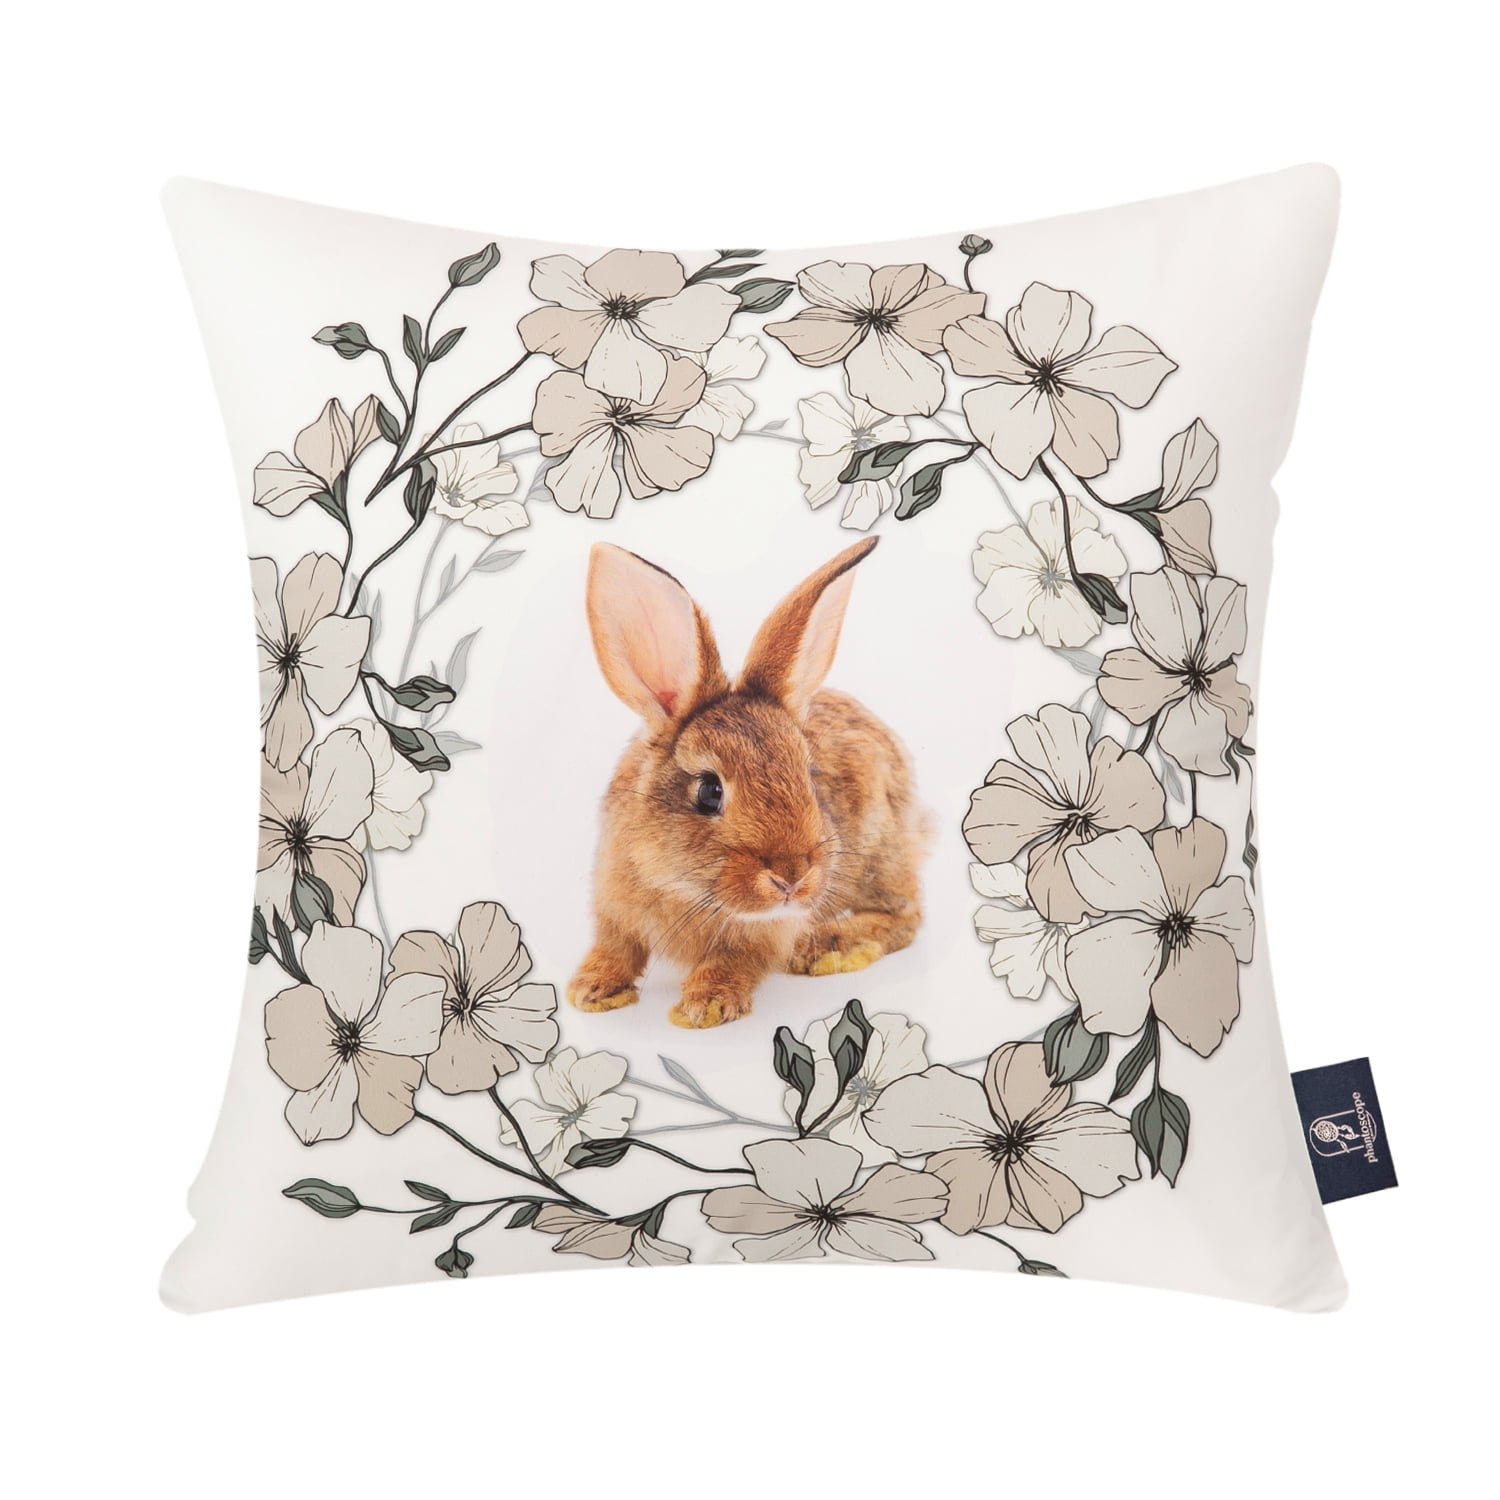 Countryside Animals 'Hare' Print Cotton Fabric Cushion Cover 16" x 16" 